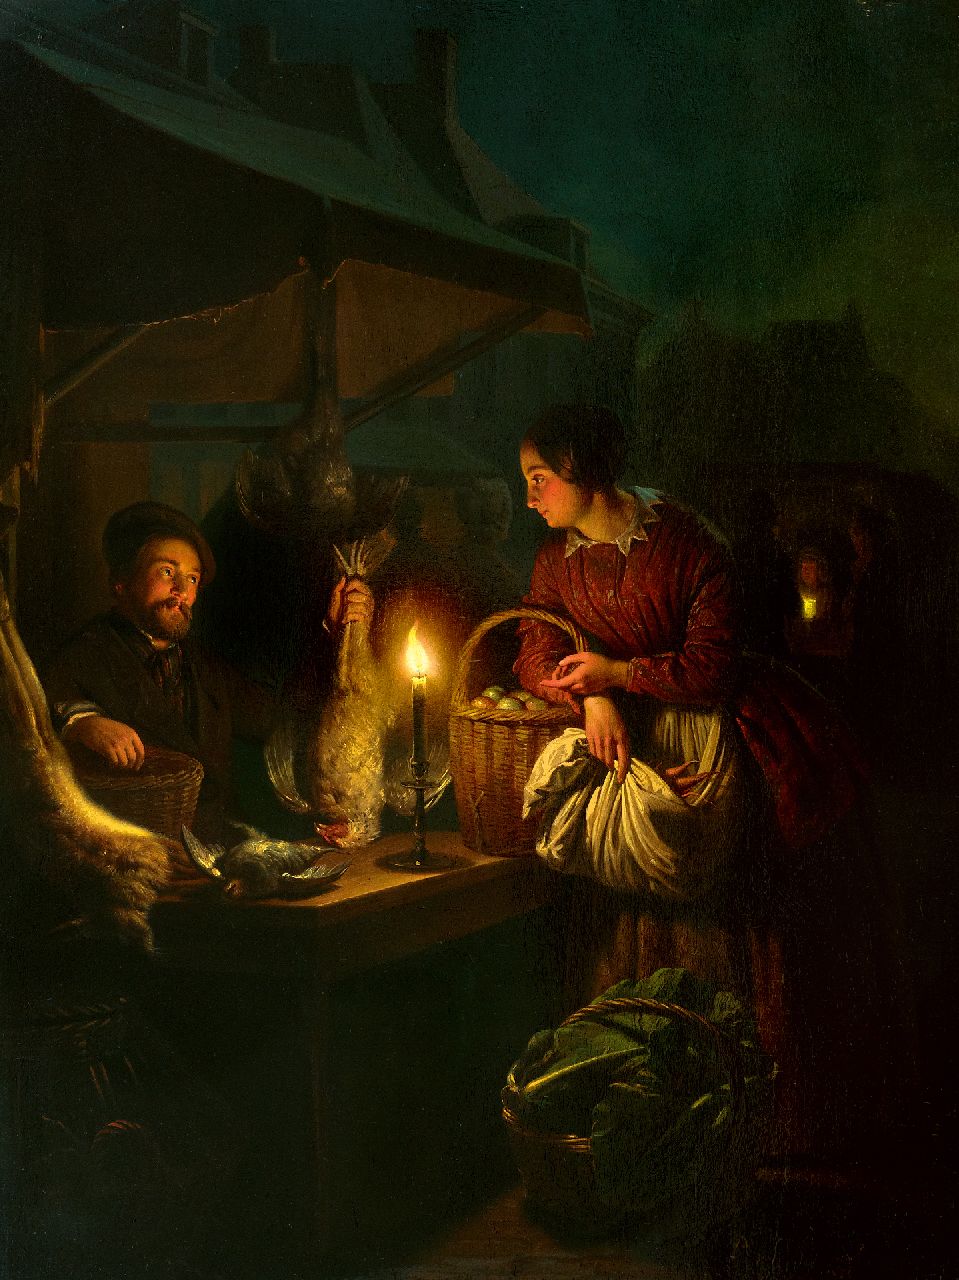 Schendel P. van | Petrus van Schendel, The game and poultry seller, by candle light, oil on panel 57.0 x 42.8 cm, signed l.r. and dated 1856